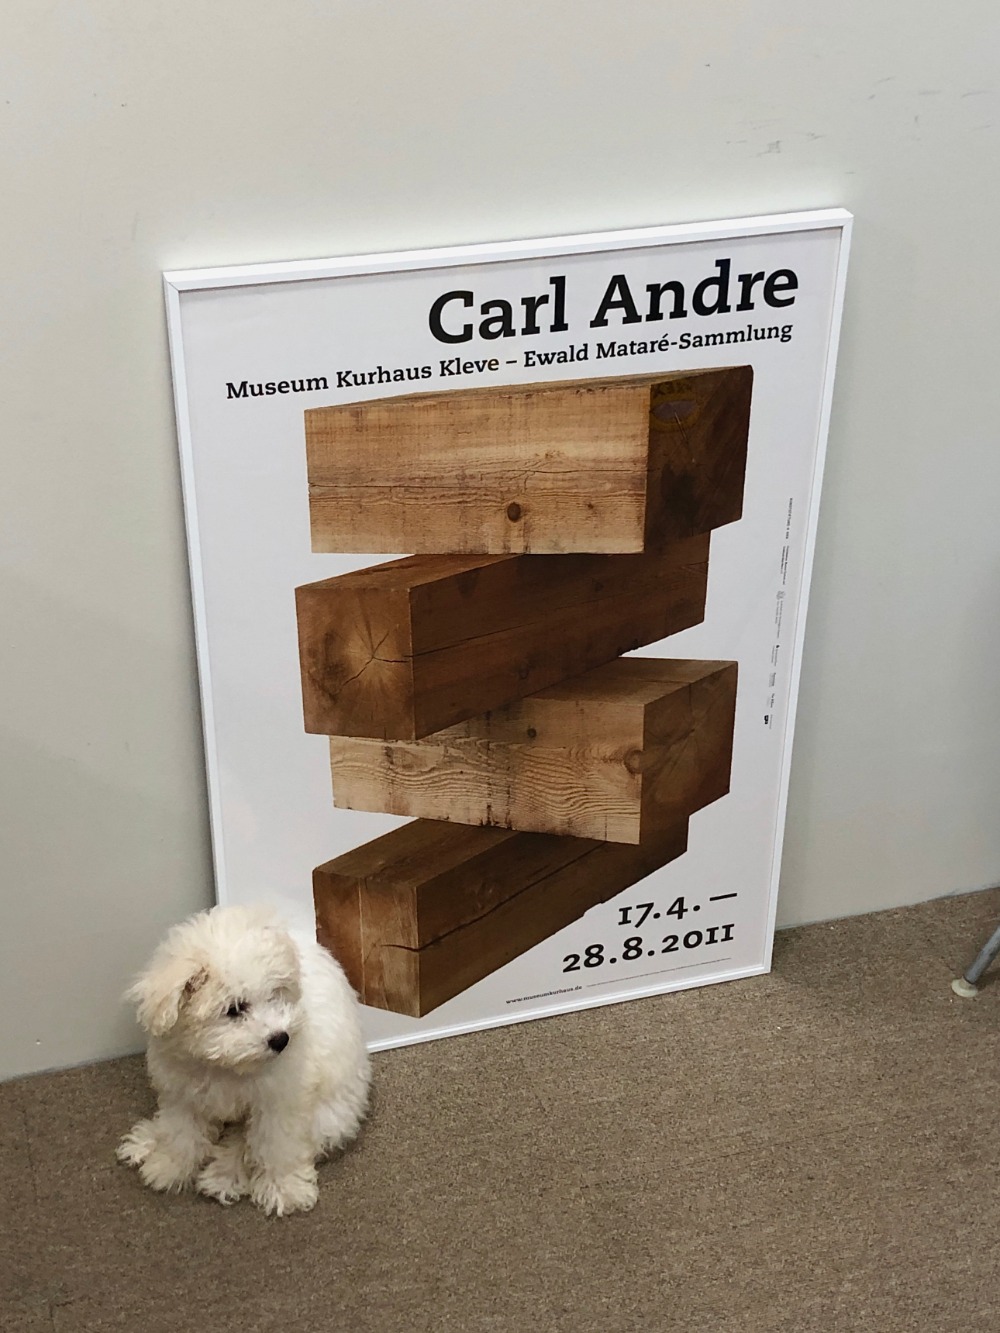 Carl Andre (2011.04.17-08.28)